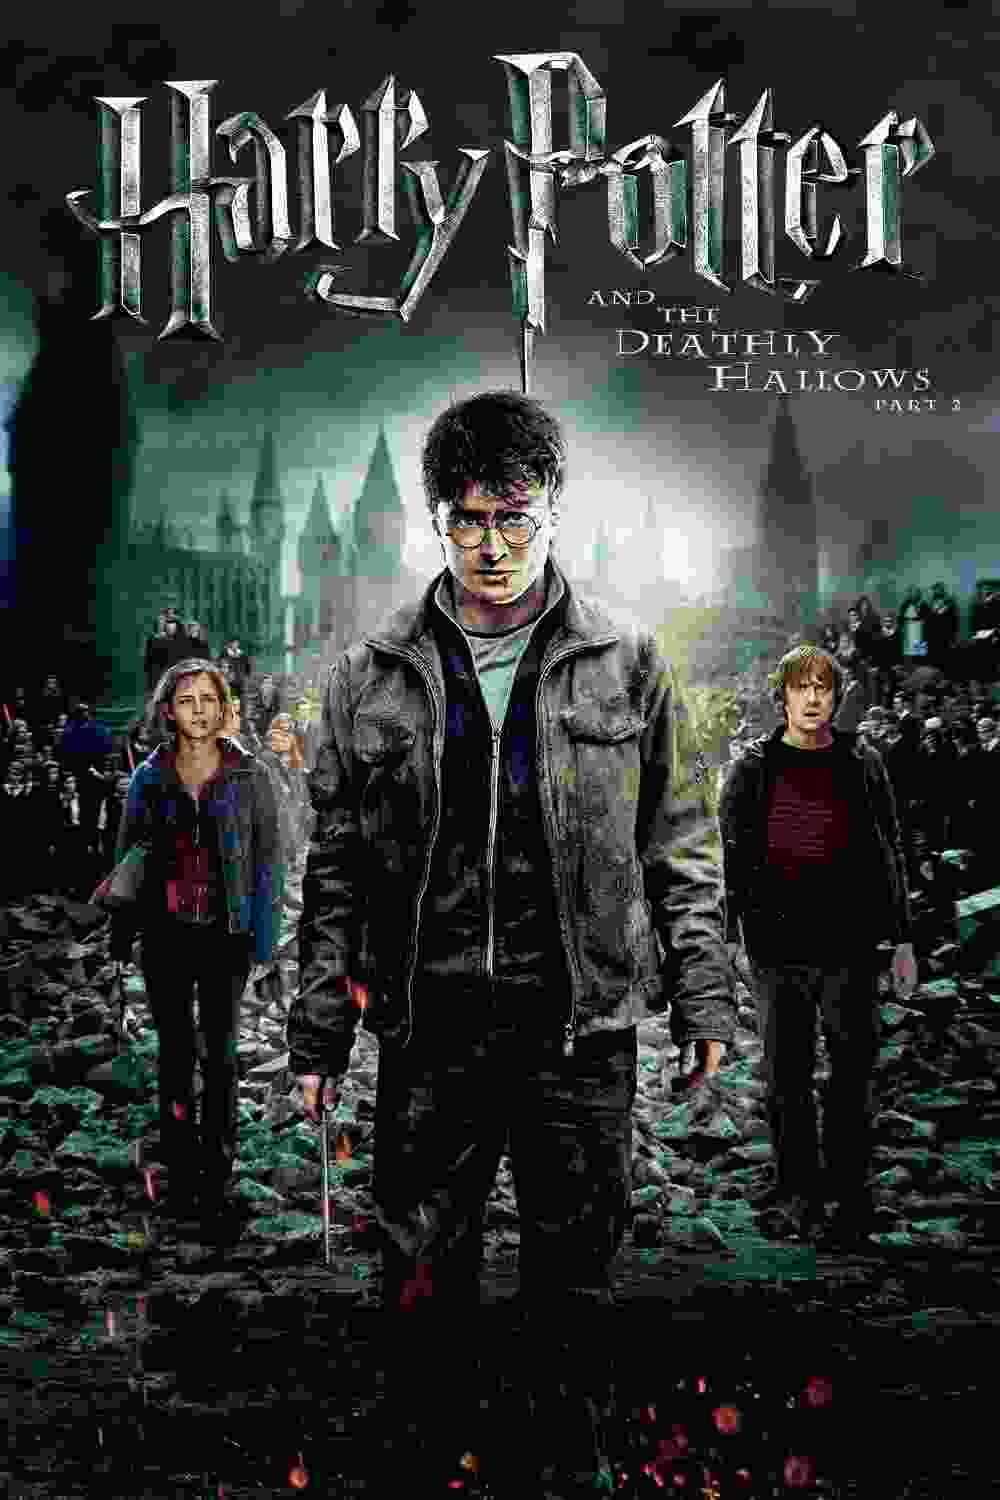 Harry Potter and the Deathly Hallows: Part 2 (2011) Daniel Radcliffe